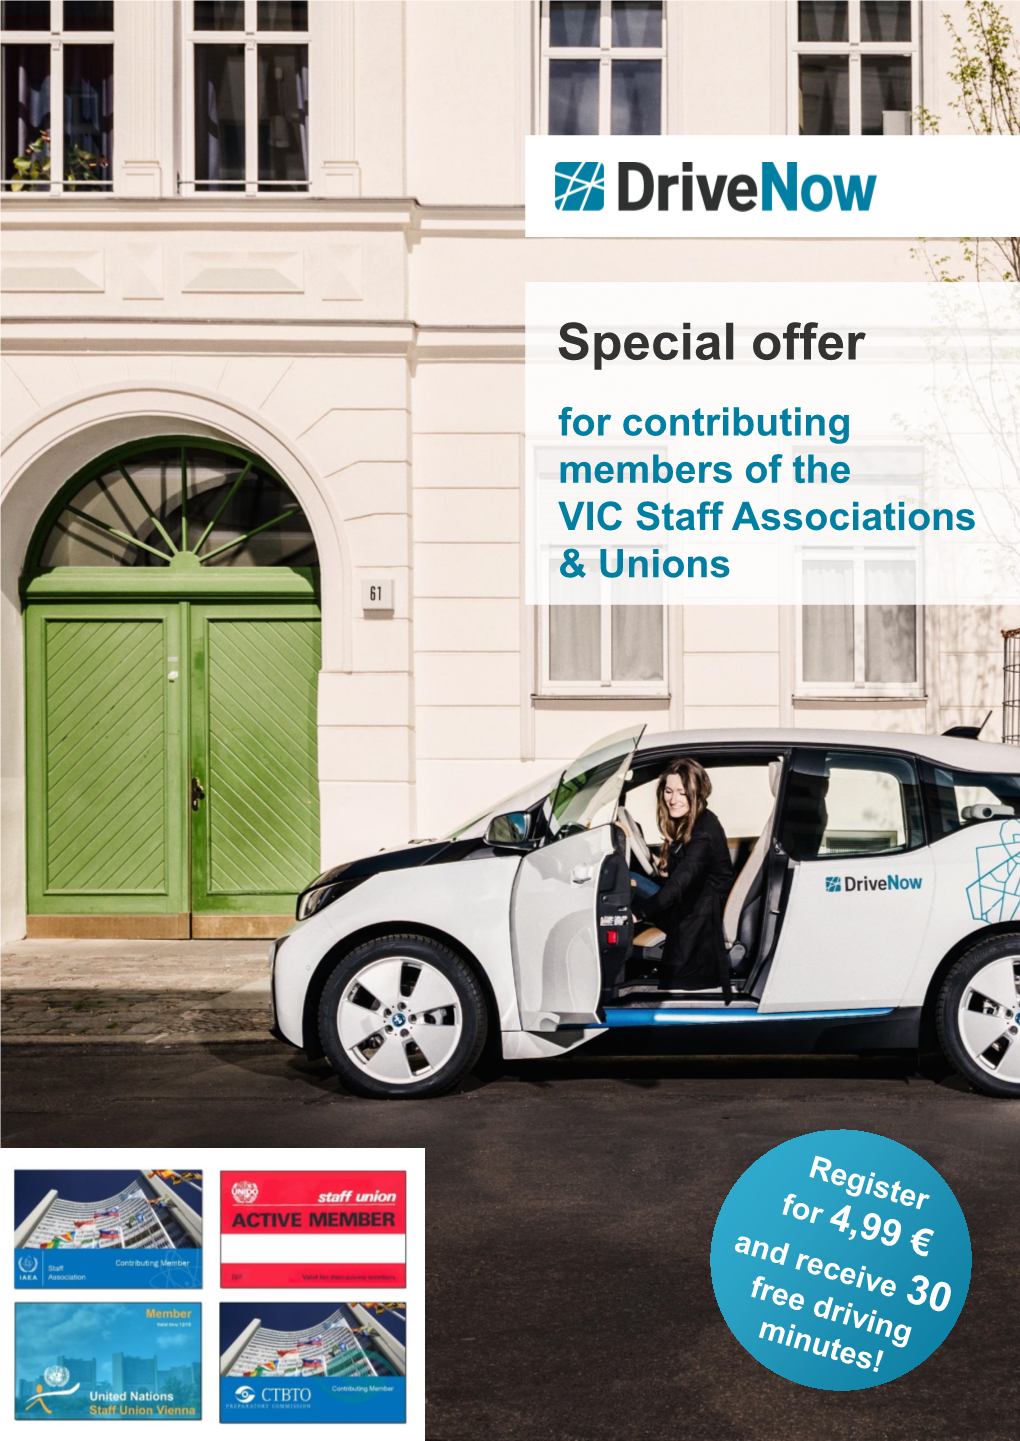 Drivenow Special Offer, 1 December 2016